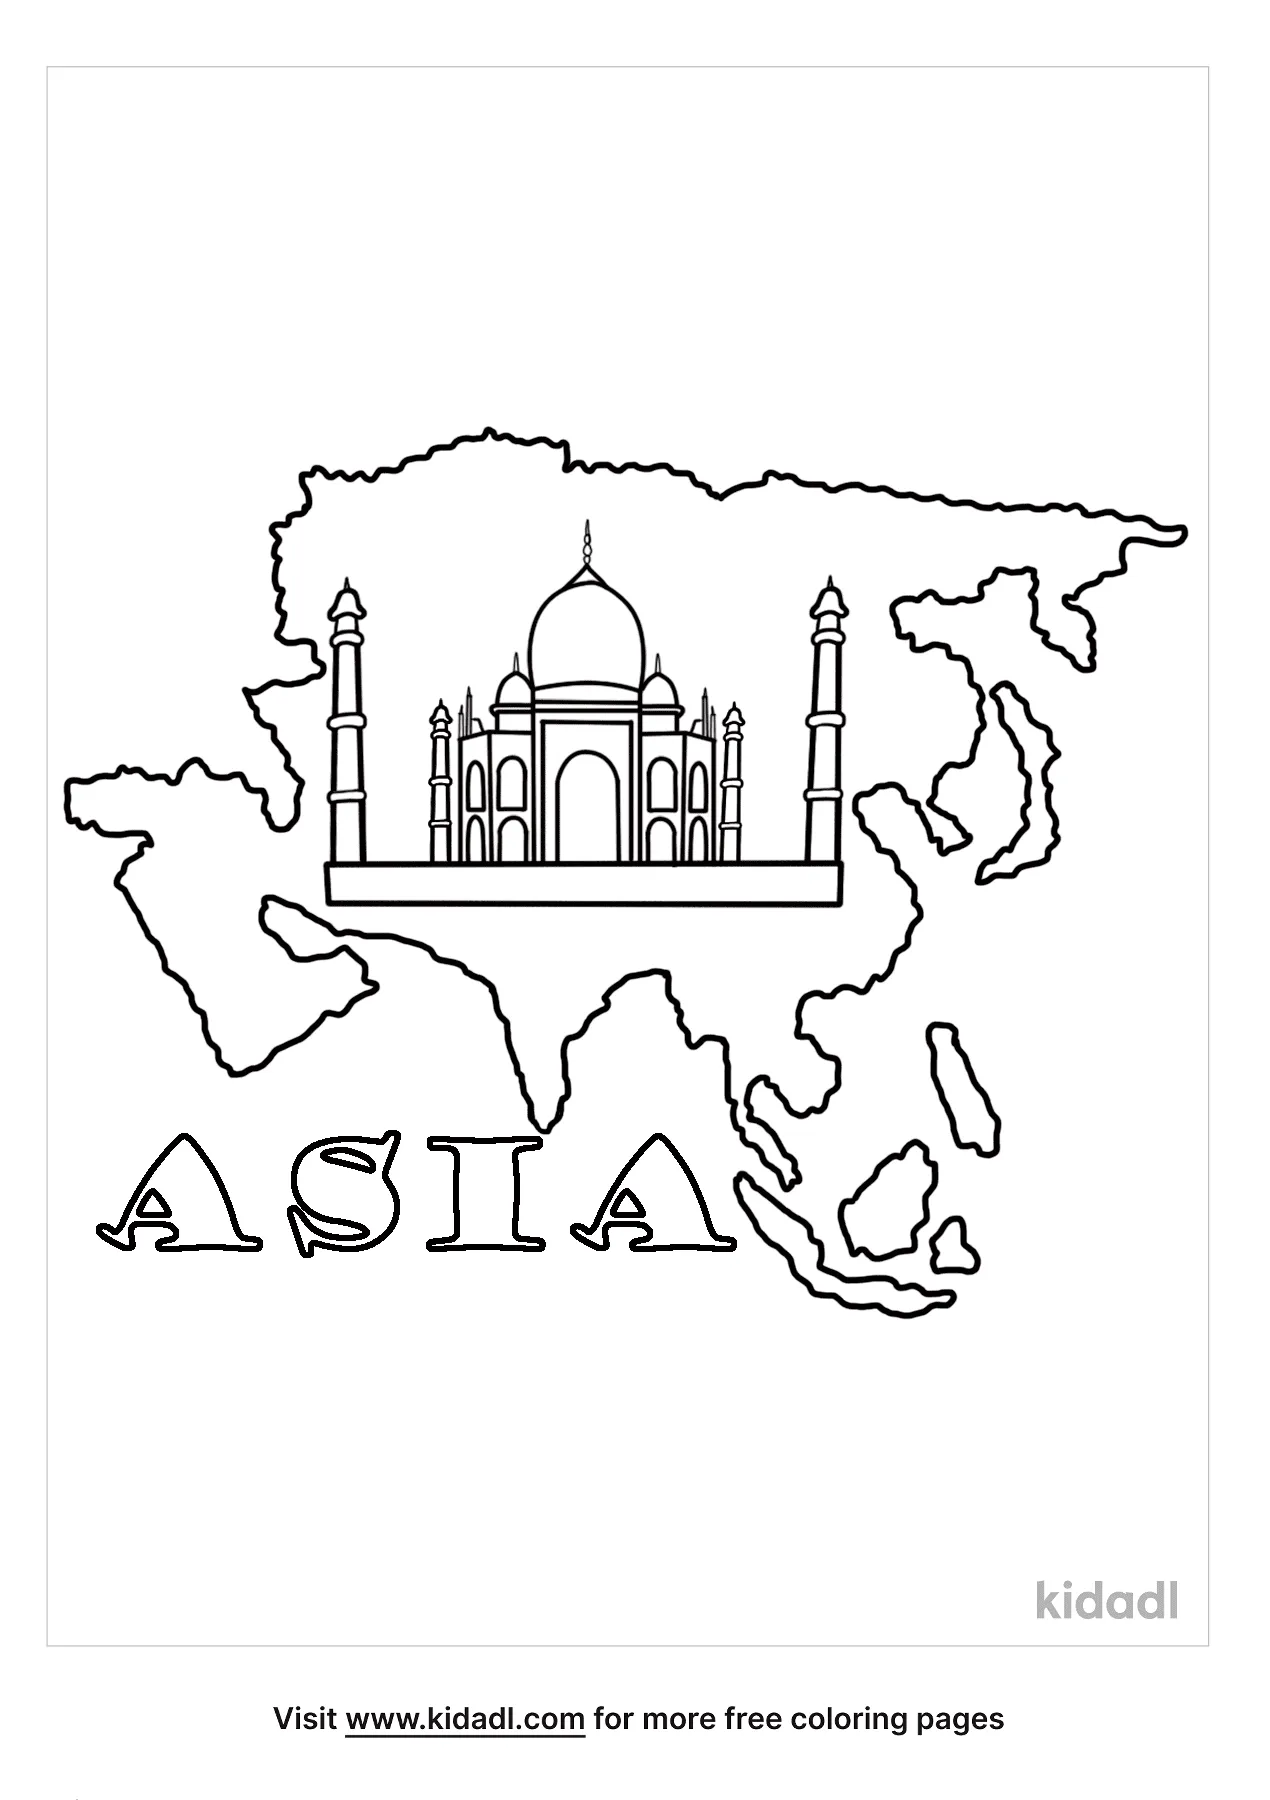 Asia Coloring Pages   Free Asia Coloring Pages   Kidadl